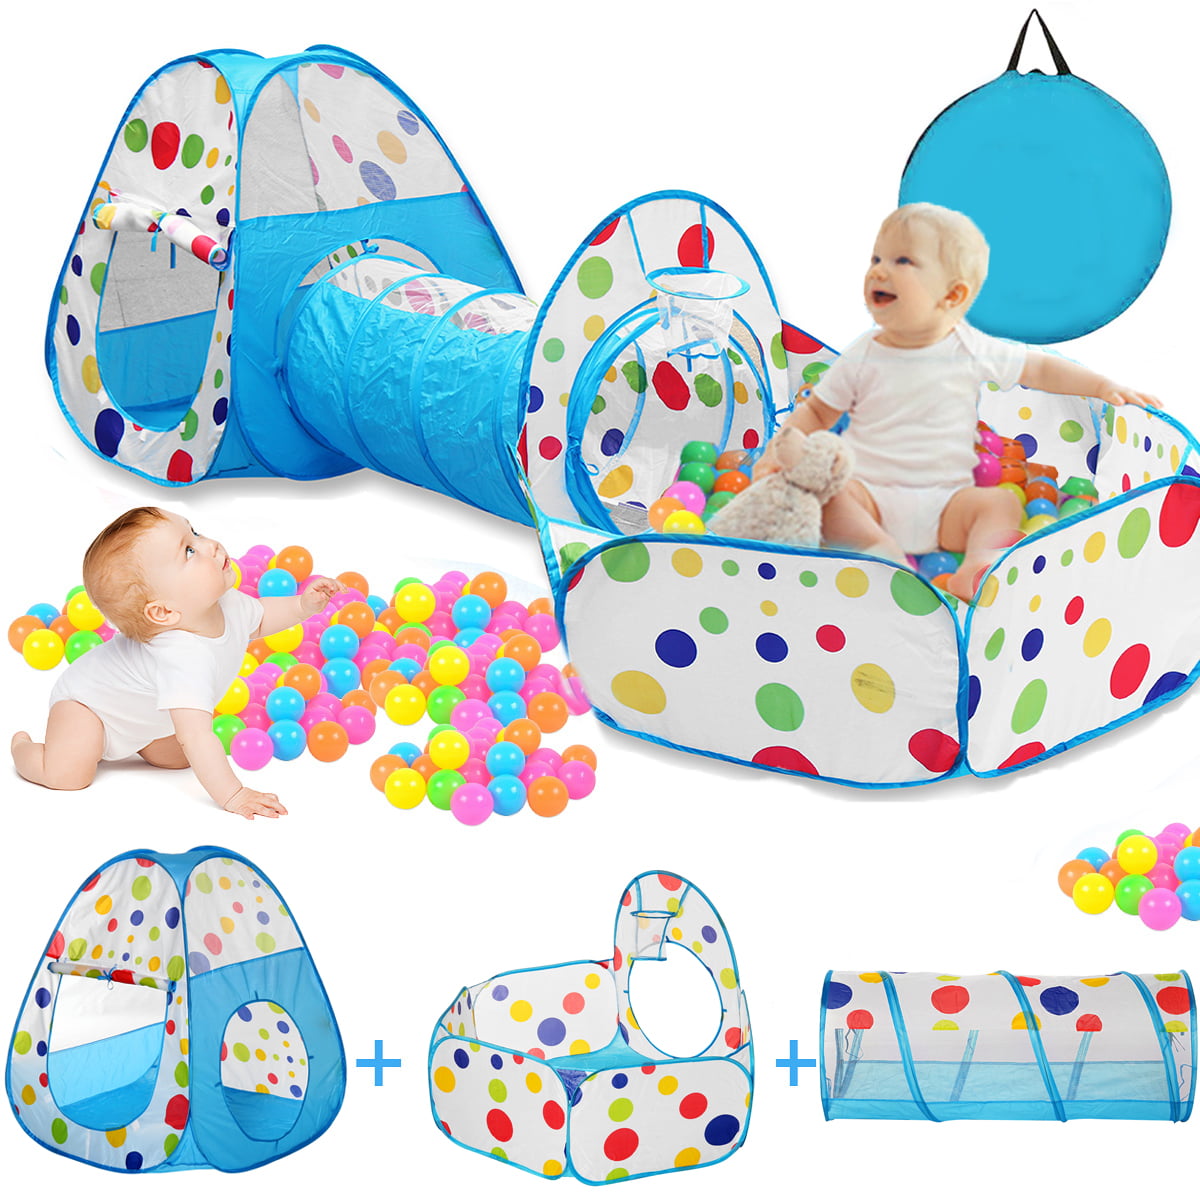 Portable 3 in 1 Childrens Kids Baby Play Tent Pop Up Tunnel Ball Pit Playhouse 